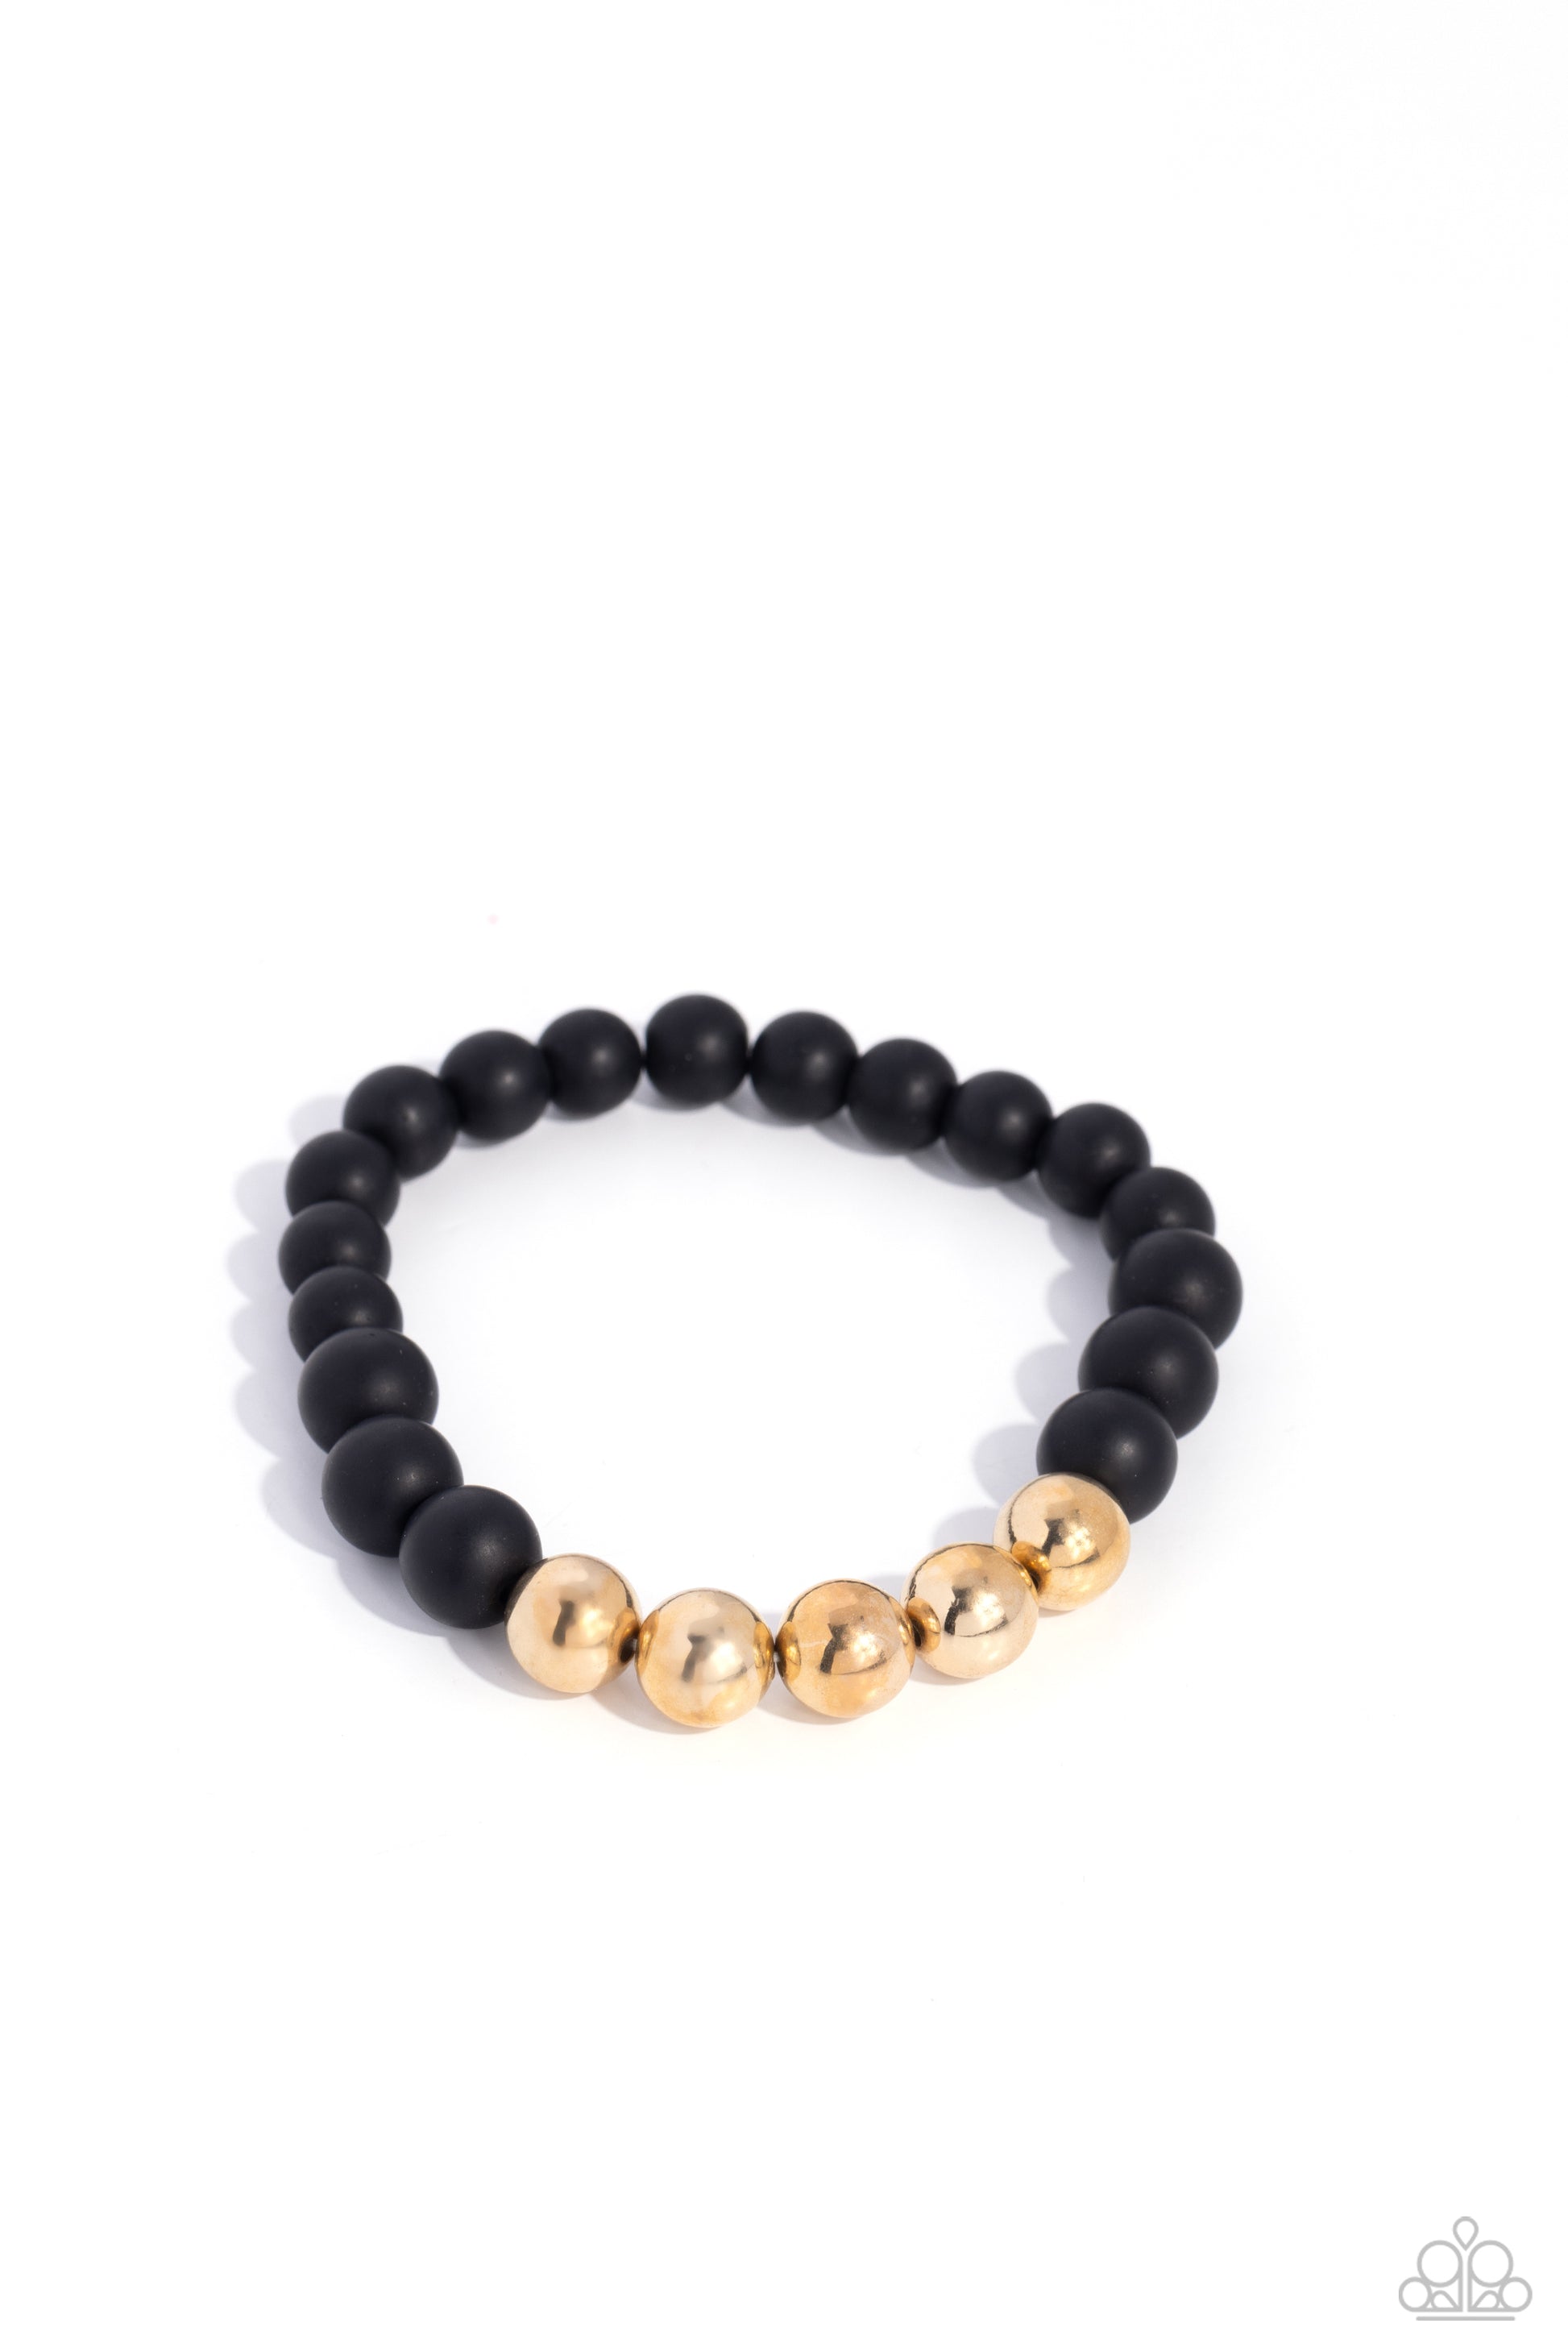 METALHEAD in the Clouds Gold Unisex Bracelet - Paparazzi Accessories  A section of gold beads joins polished black stone beads along stretchy bands around the wrist, resulting in a metallic edge.  Sold as one individual bracelet.  P9SE-URGD-033XX